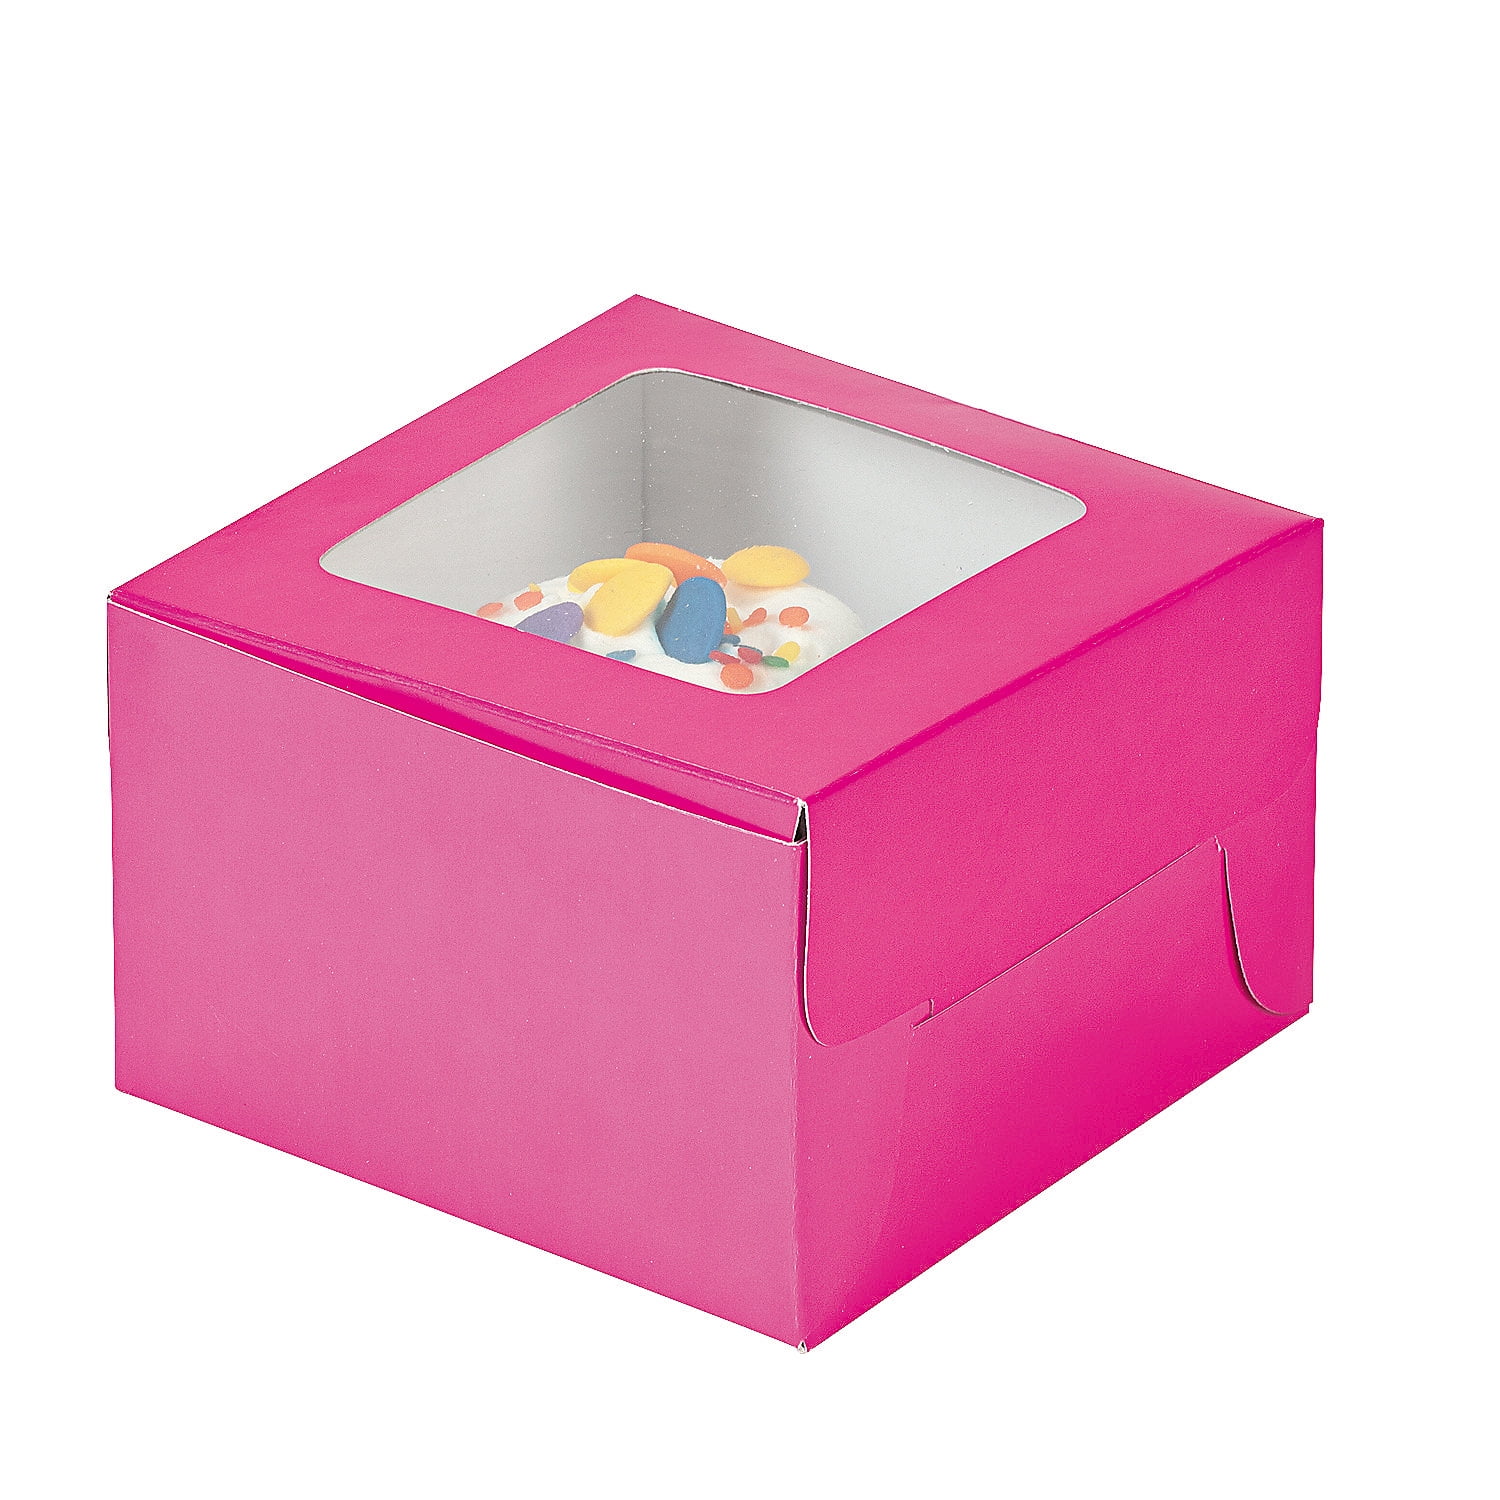 Containers /& Boxes 12 Pieces Fun Express Paper Boxes Football Treat Boxes for Birthday Birthday Party Supplies